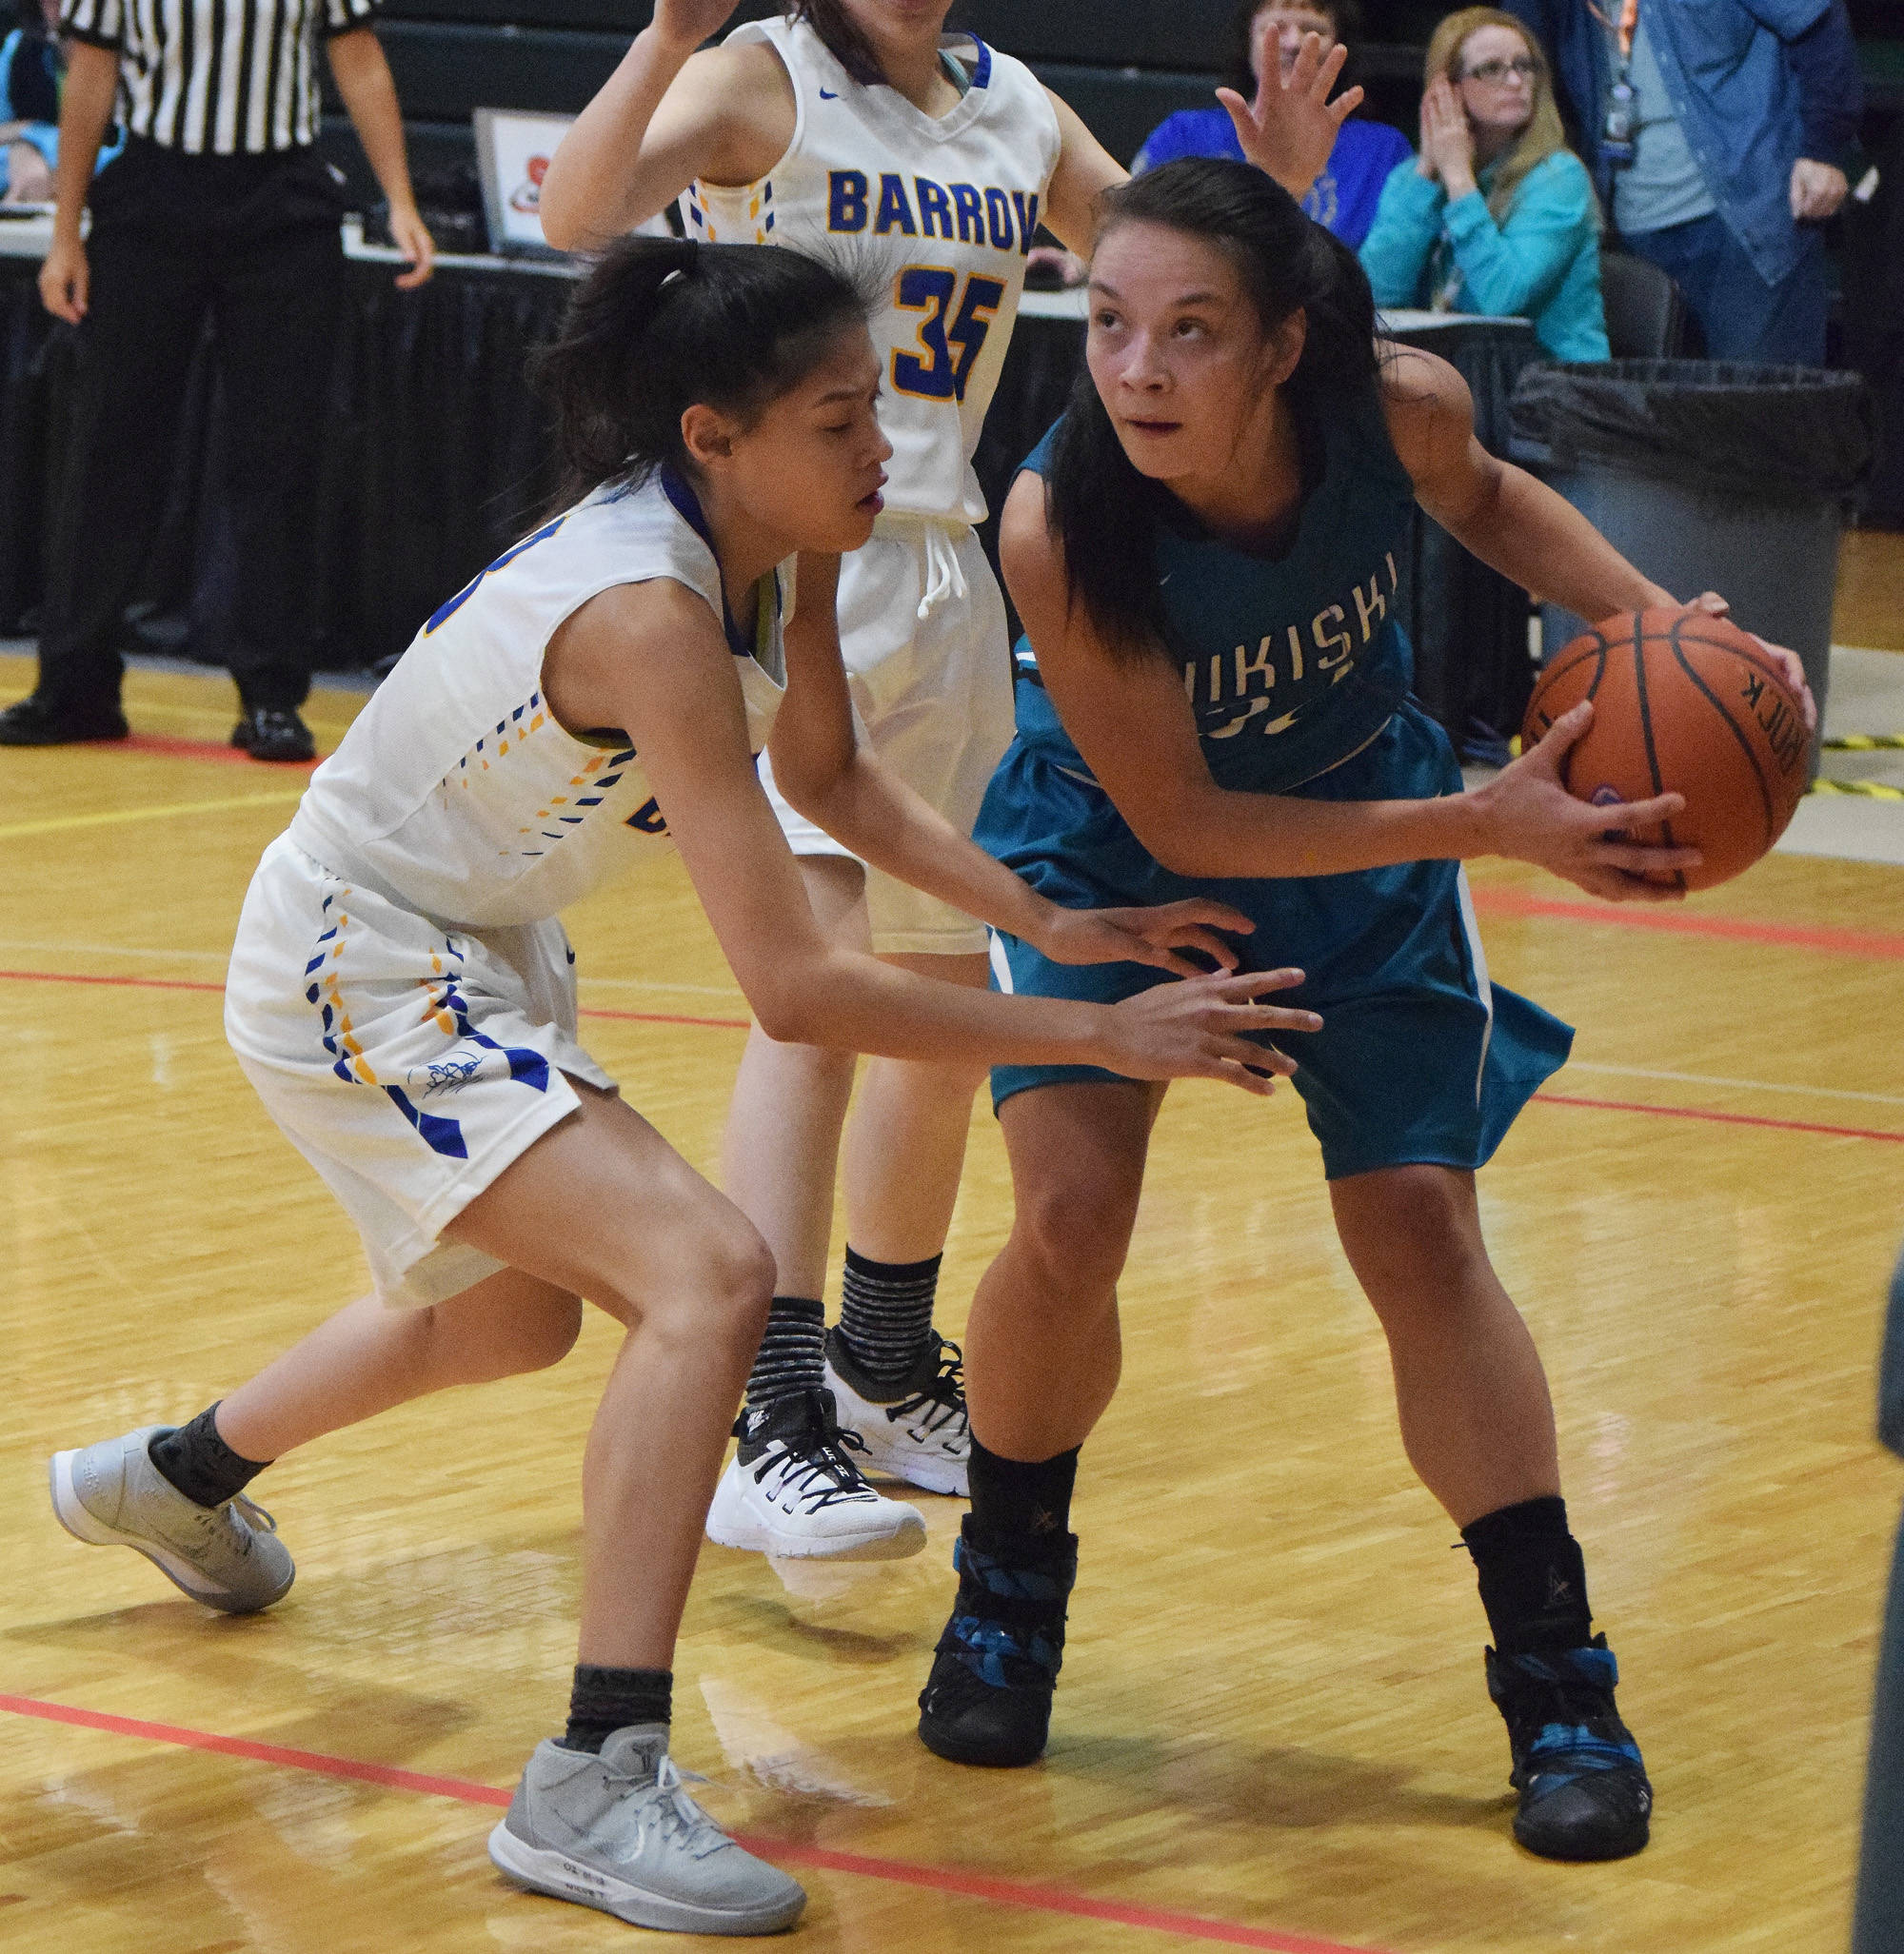 Nikiski’s Rylee Jackson (right) looks for space against Barrow’s Lewanne Brower, Thursday evening at the Class 3A state tournament at the Alaska Airlines Center. (Photo by Joey Klecka/Peninsula Clarion)